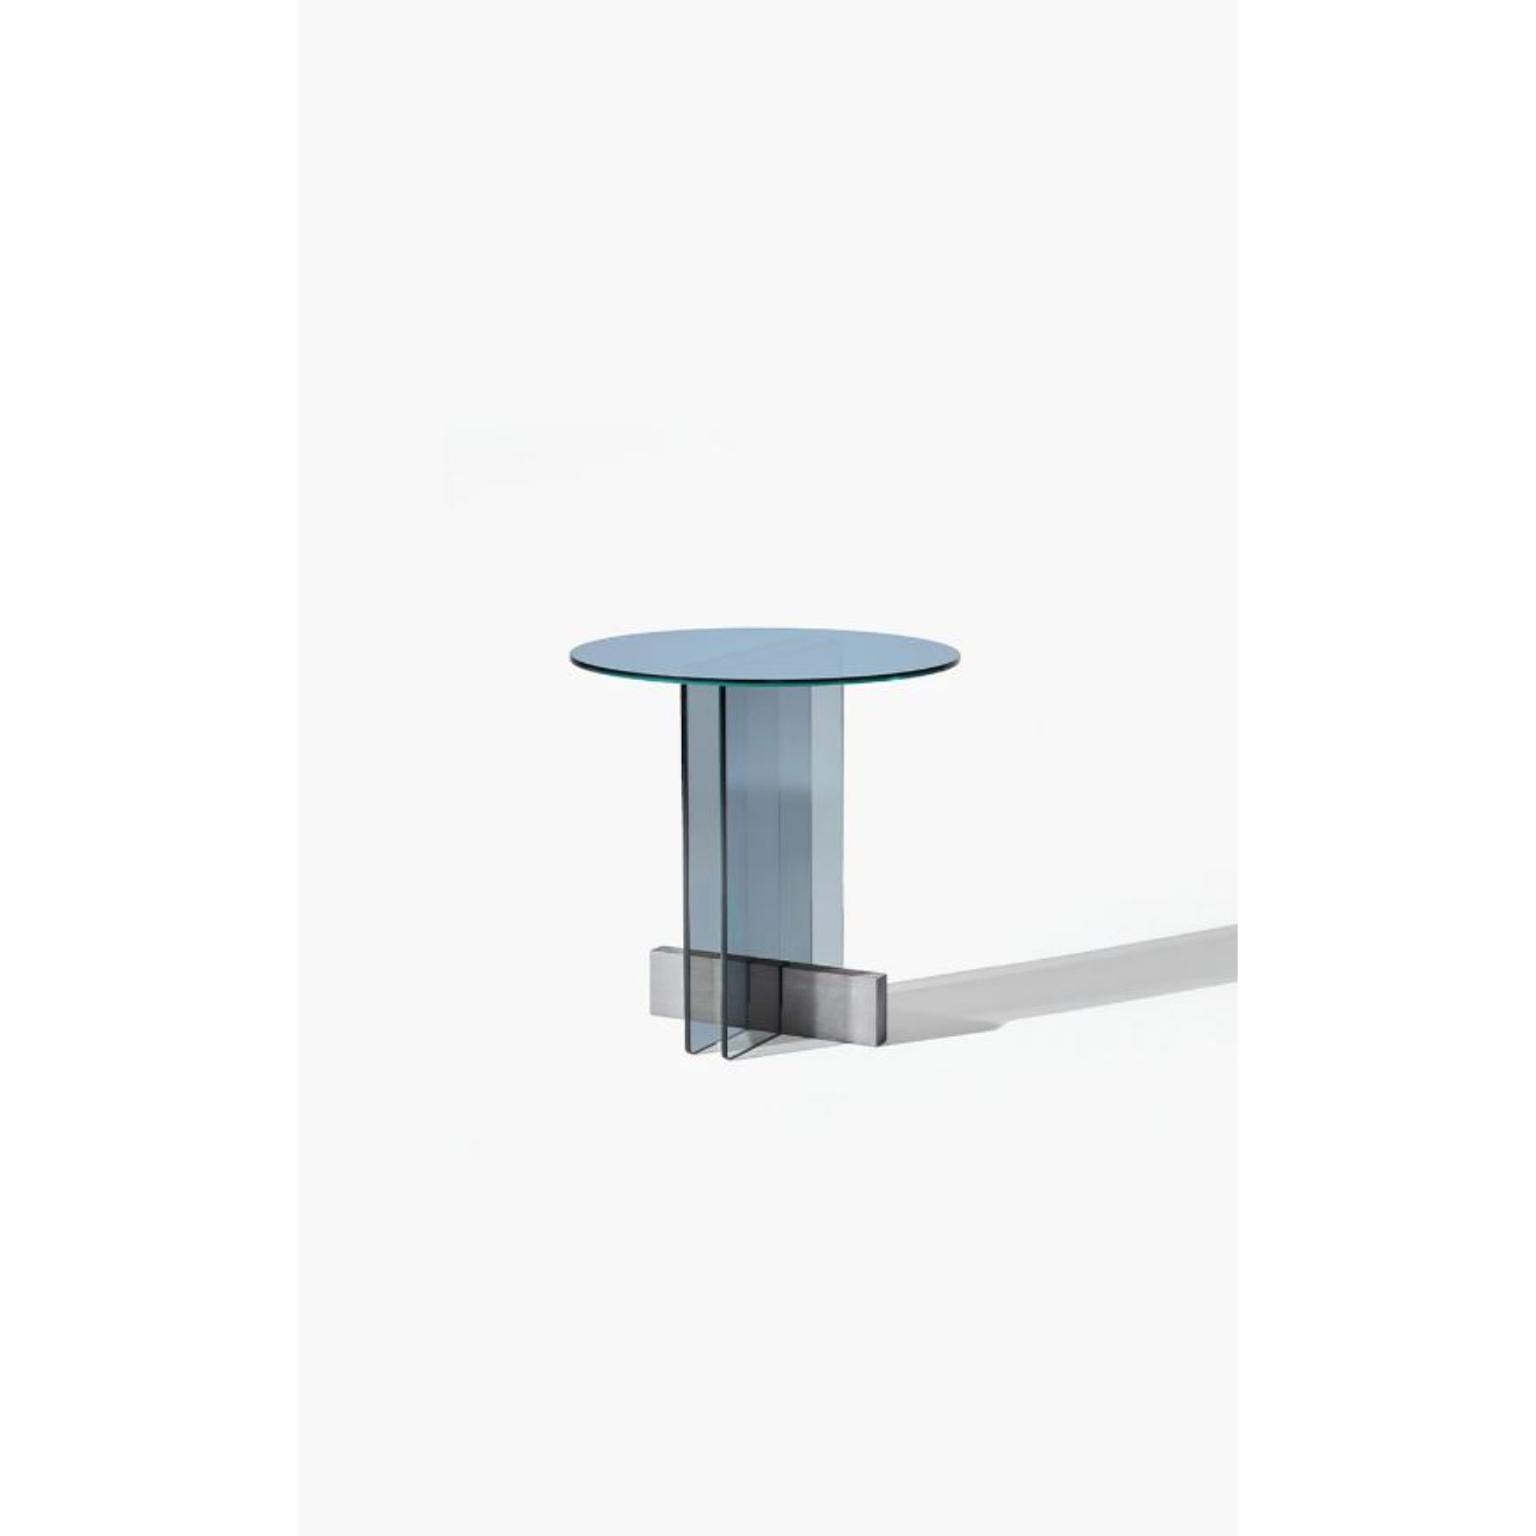 Vidro Side Table S by Wentz
Dimensions: D 45 x W 45 x H 45 cm
Materials: Glass, Wood.
Weight: 10,5kg / 23,1 lbs

The constant search for lightness in different forms led to a new project that has glass as the protagonist. The wooden base works as a